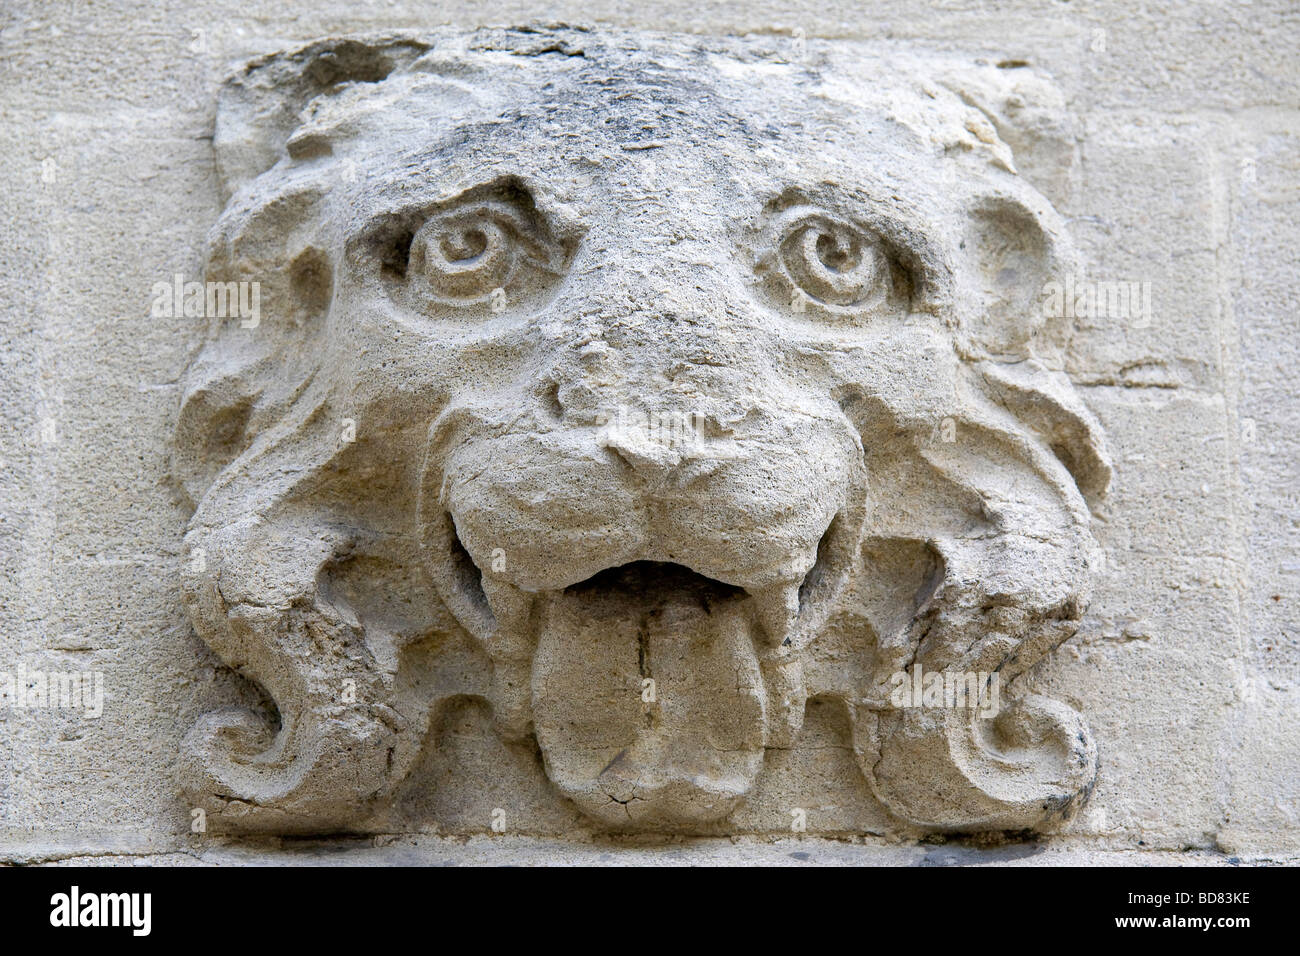 Dopey carved lion's head, St Giles, Oxford Stock Photo